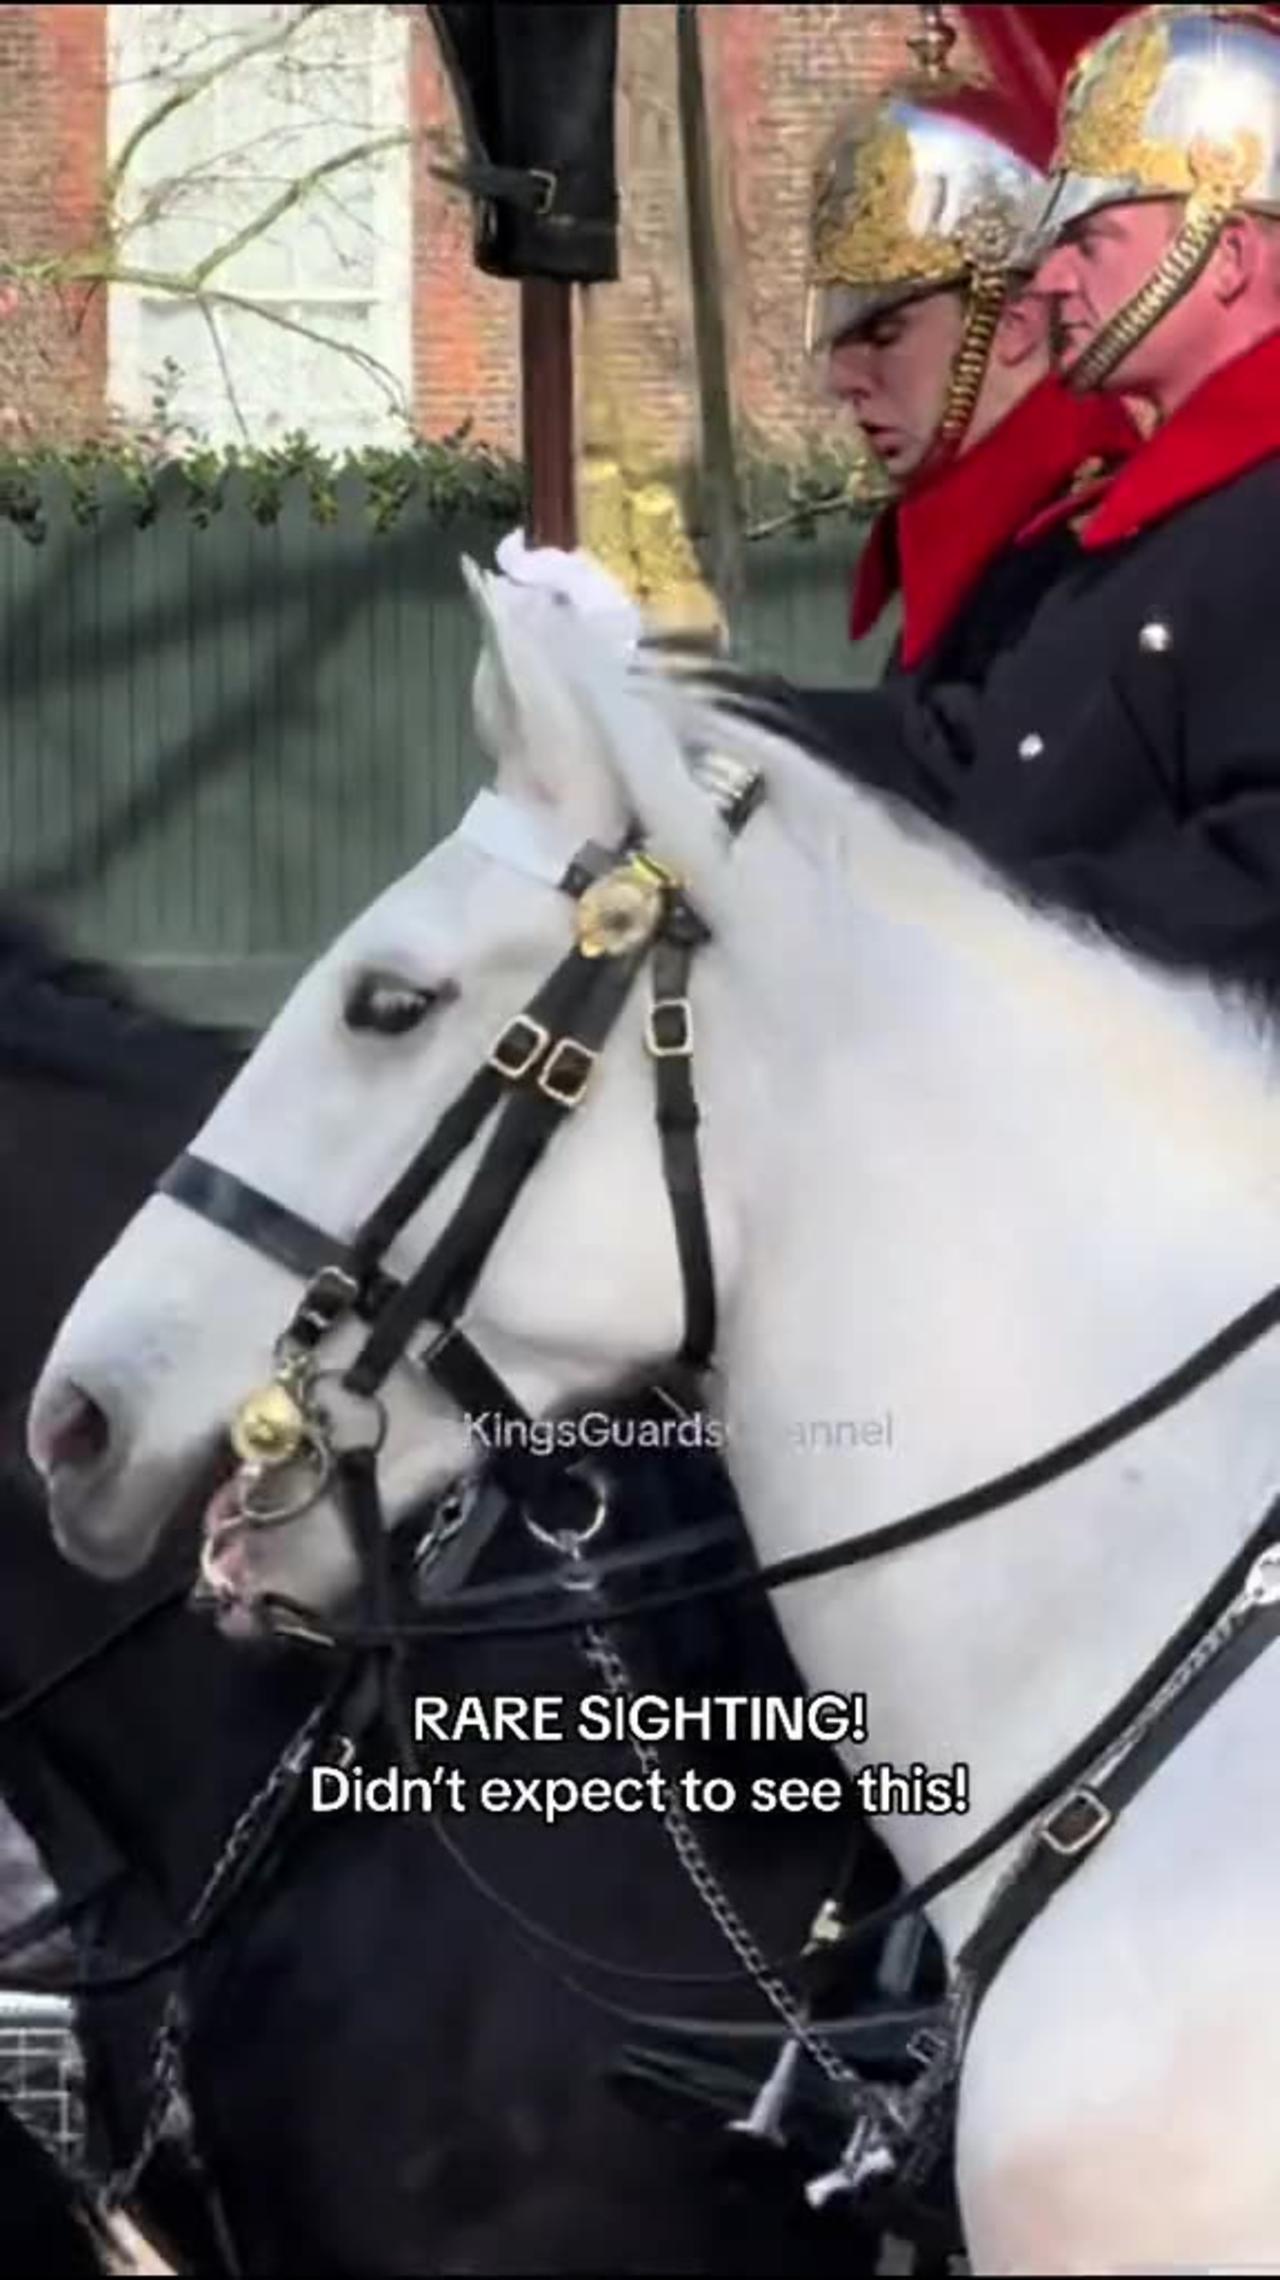 Blues and Royals Guard seen with Union Flag — The White Horse is Out